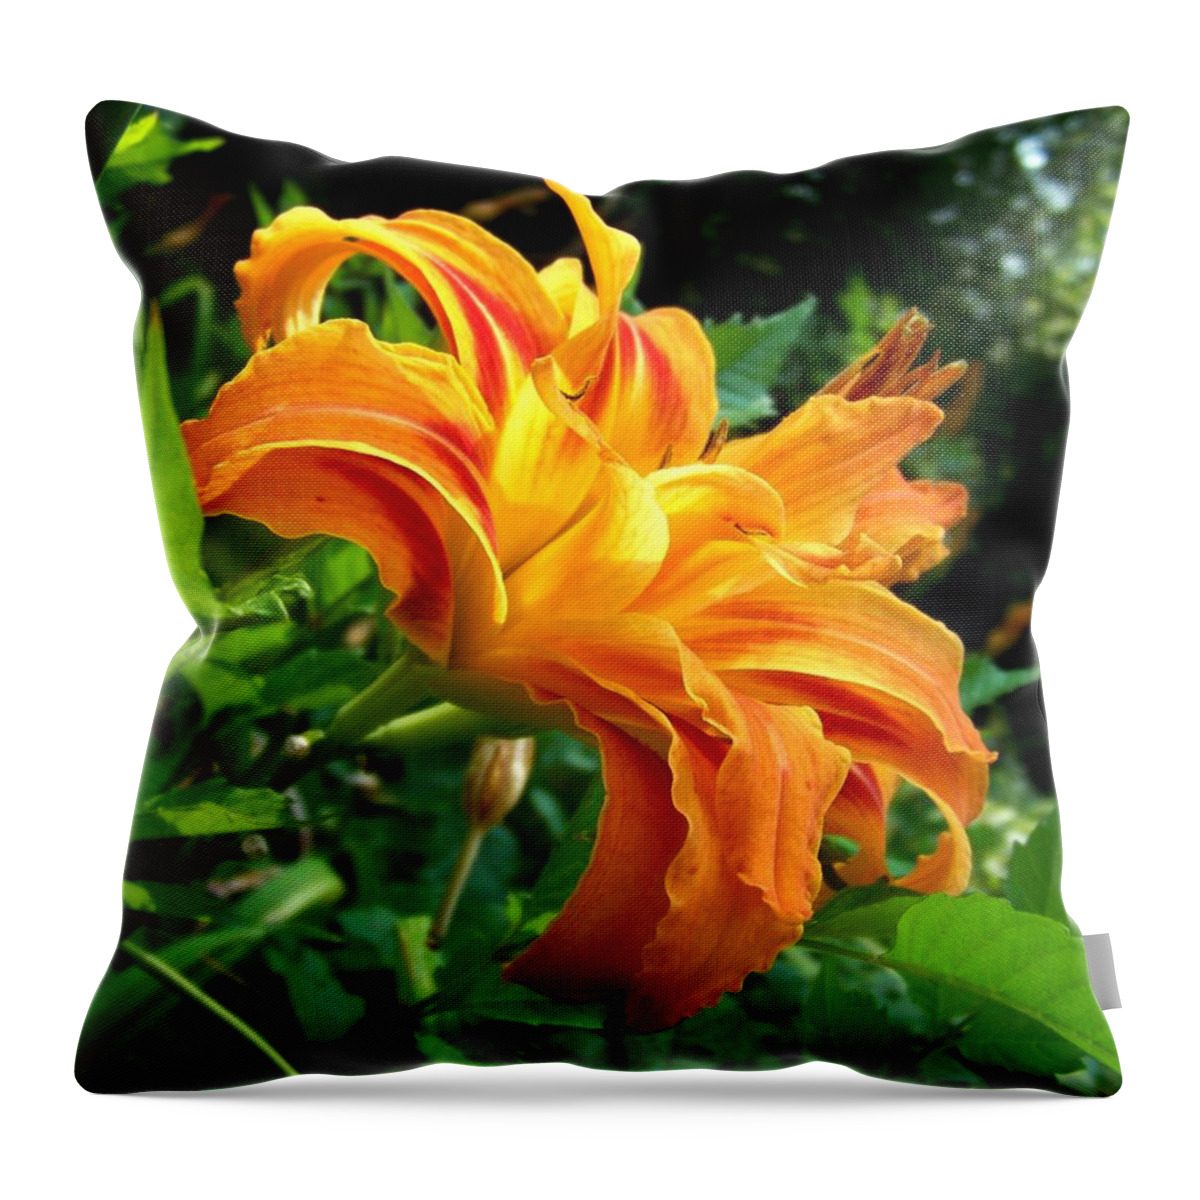 Flower Throw Pillow featuring the photograph Double Blossom Orange Lily by Jai Johnson